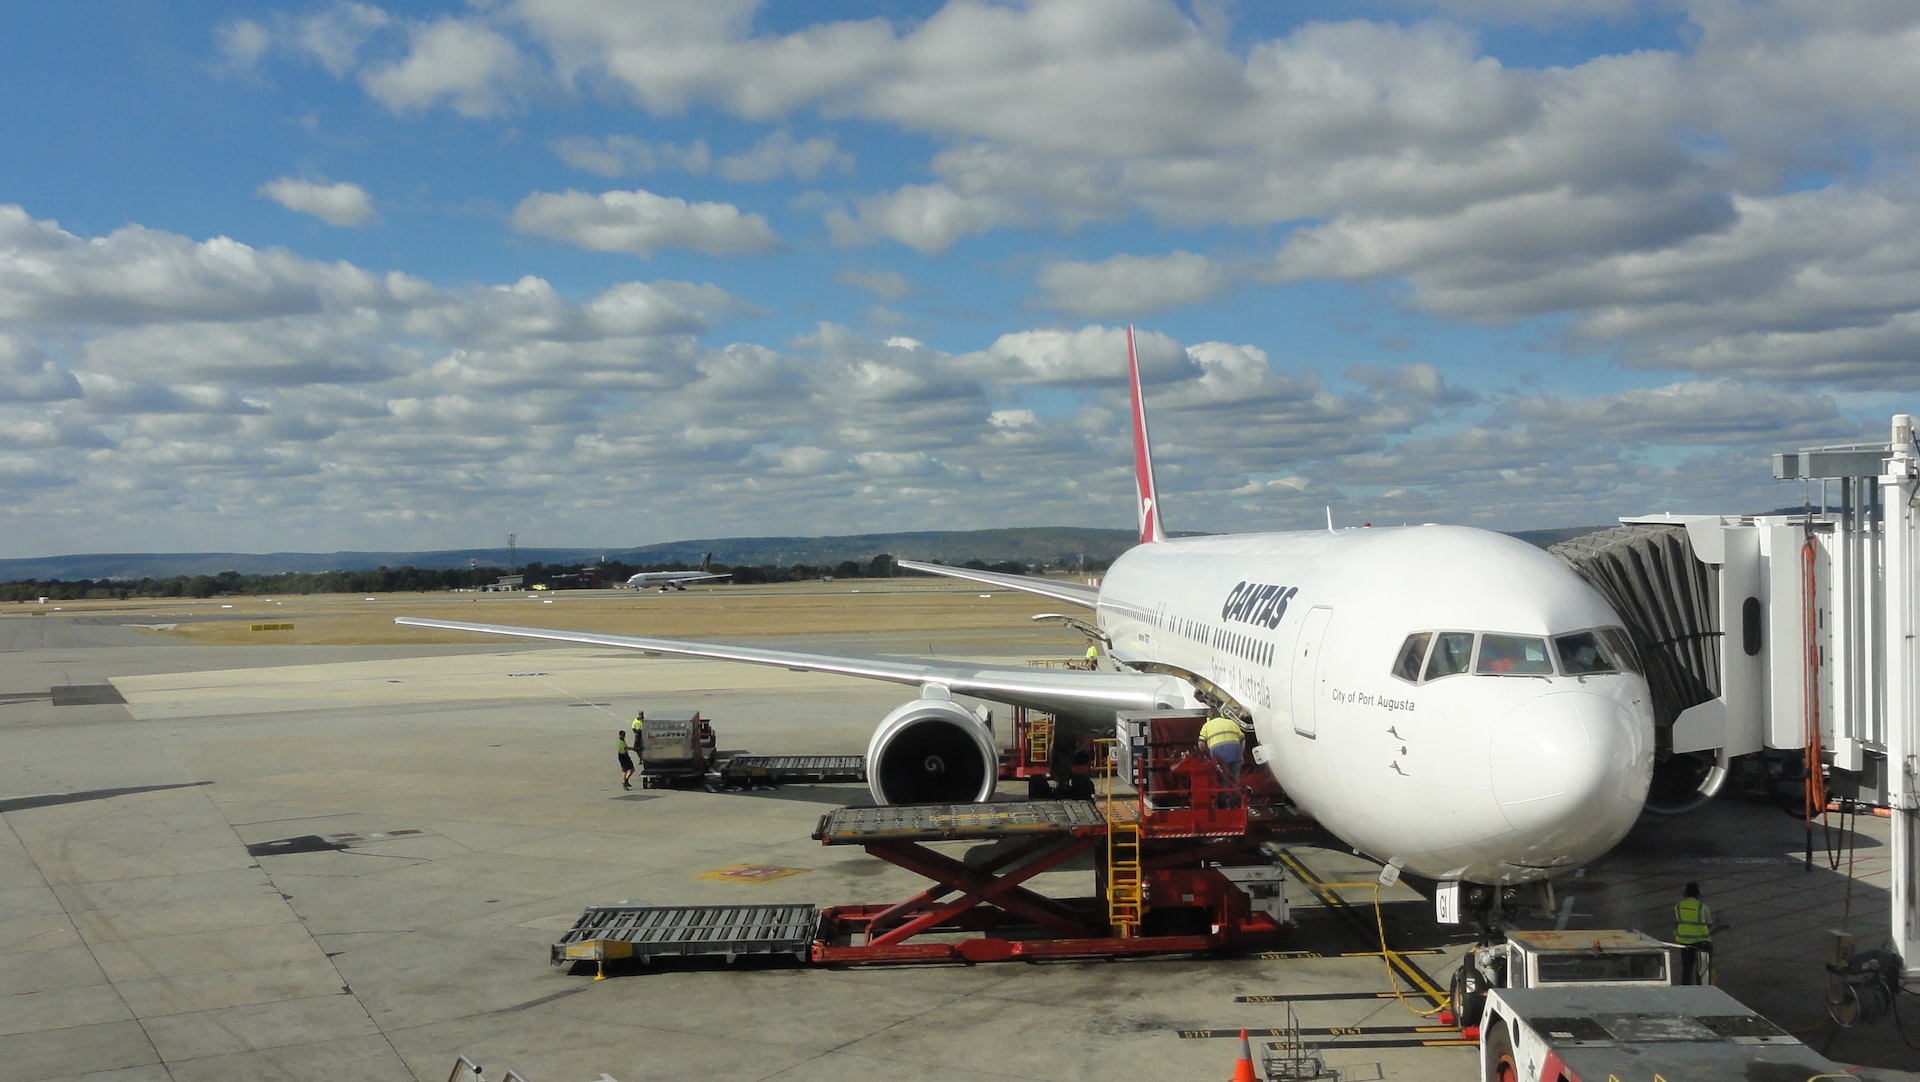 The safest airline in the world: Qantas